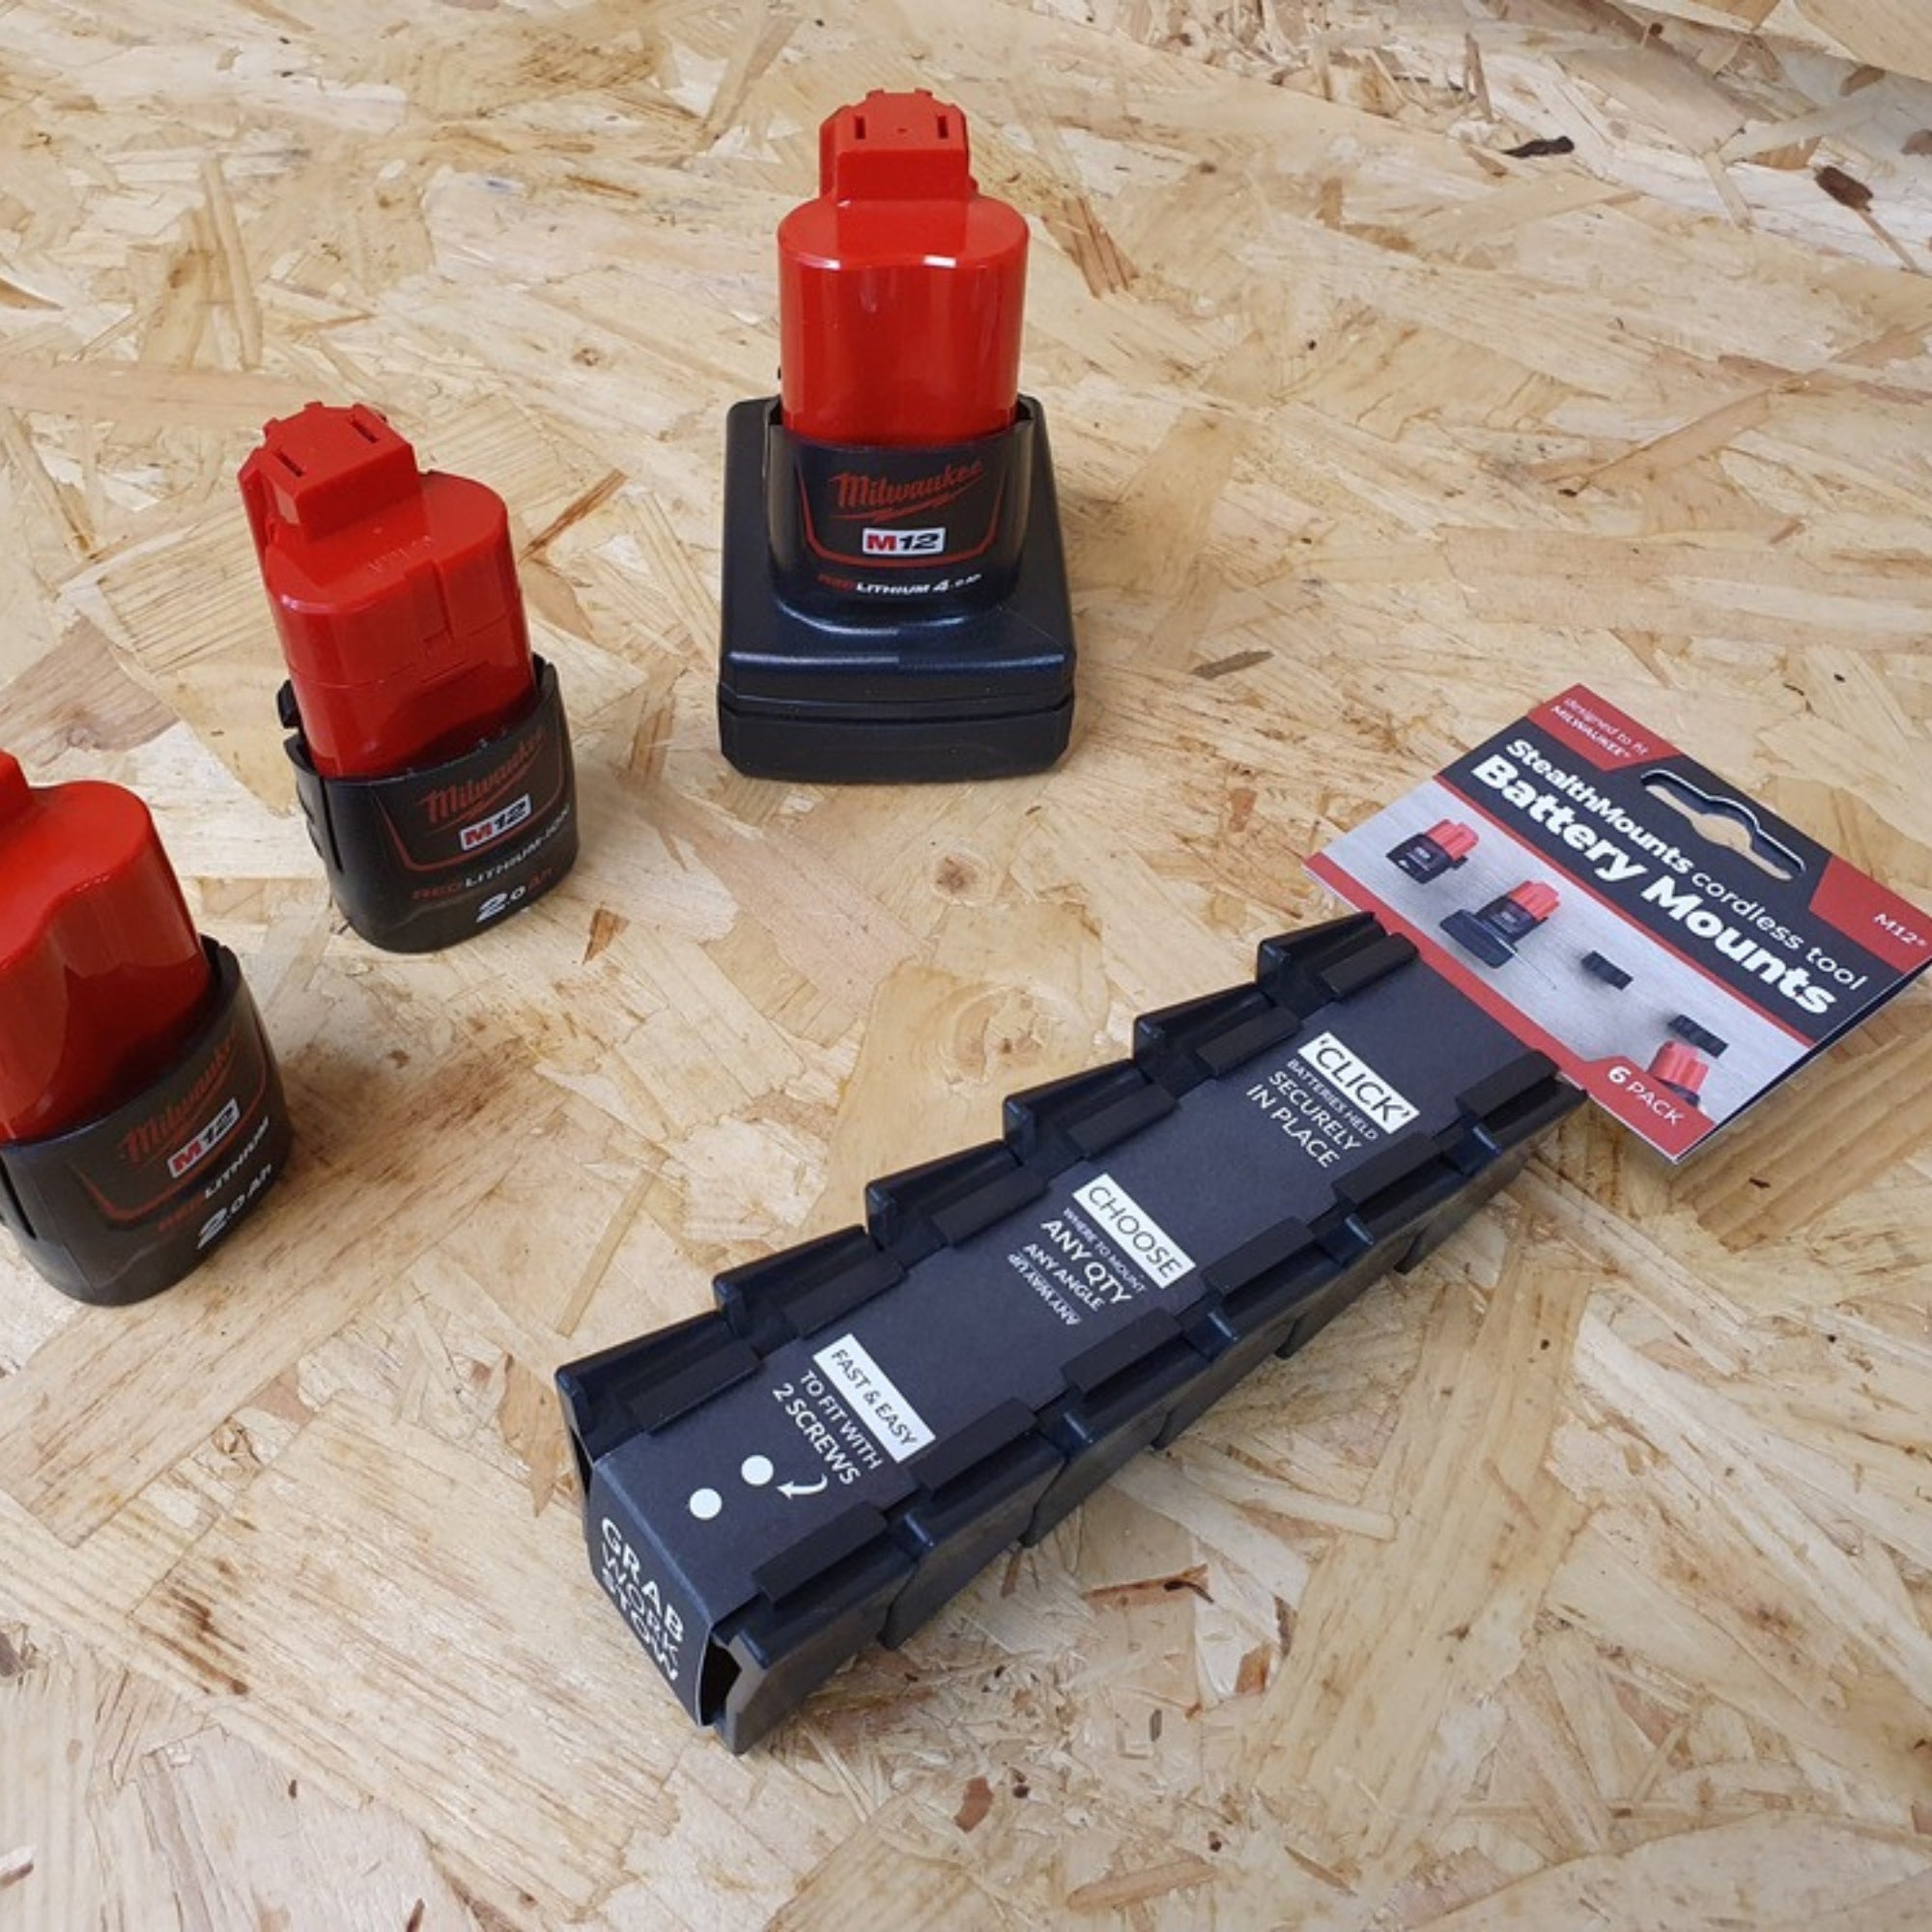 StealthMounts Battery Mounts for Milwaukee M12 (6 Pack)